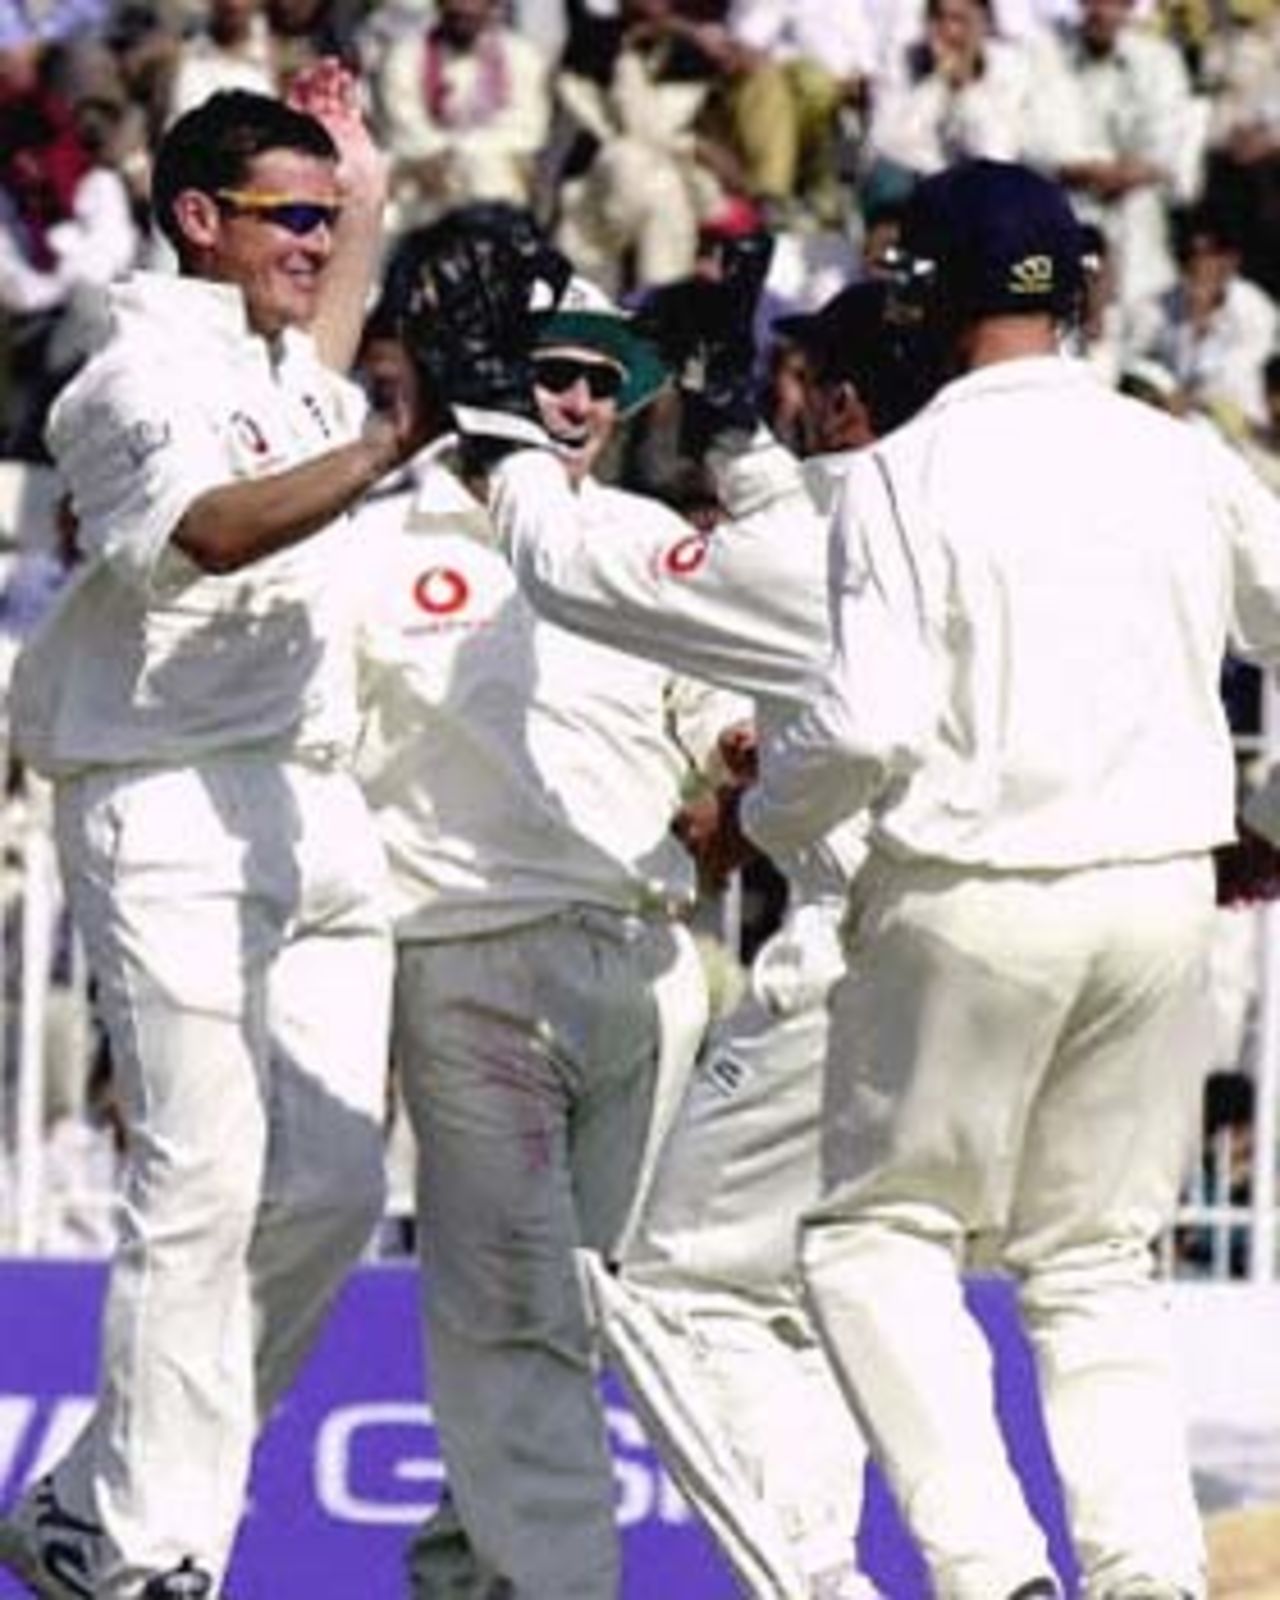 Ashley Giles being congratulated by his team mates after his second dismissal, England in Pakistan, 2000/01, 2nd Test, Pakistan v England, Iqbal Stadium, Faisalabad, 29Nov-03Dec 2000 (Day 1).